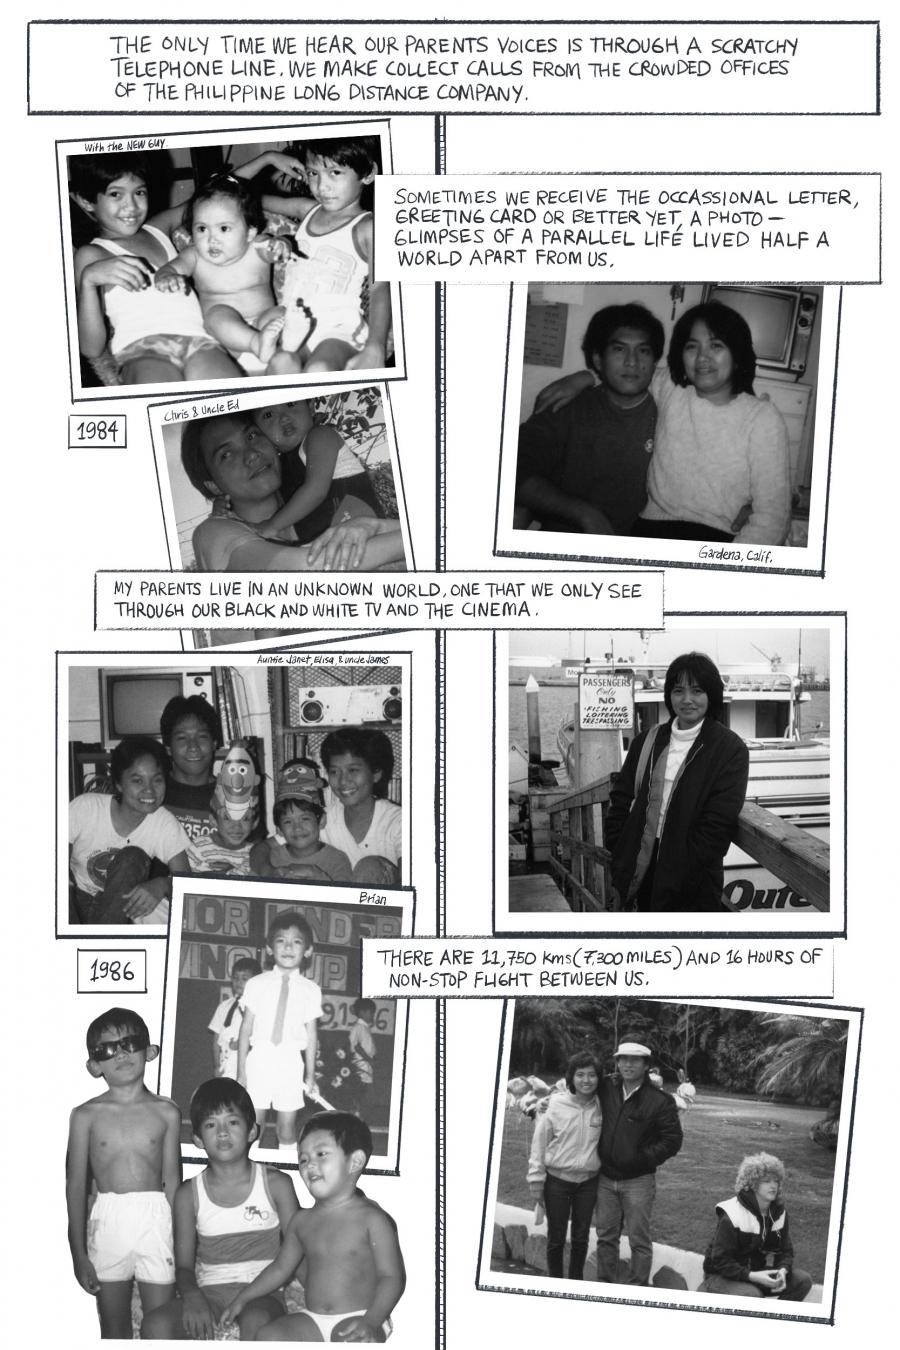 Comic panel: The only time we hear our parents' voices is through a scratchy telephone line. We make collect calls from the crowded offices of the Philippine long distance company. Below are black and white family photos showing two lives lived apart.